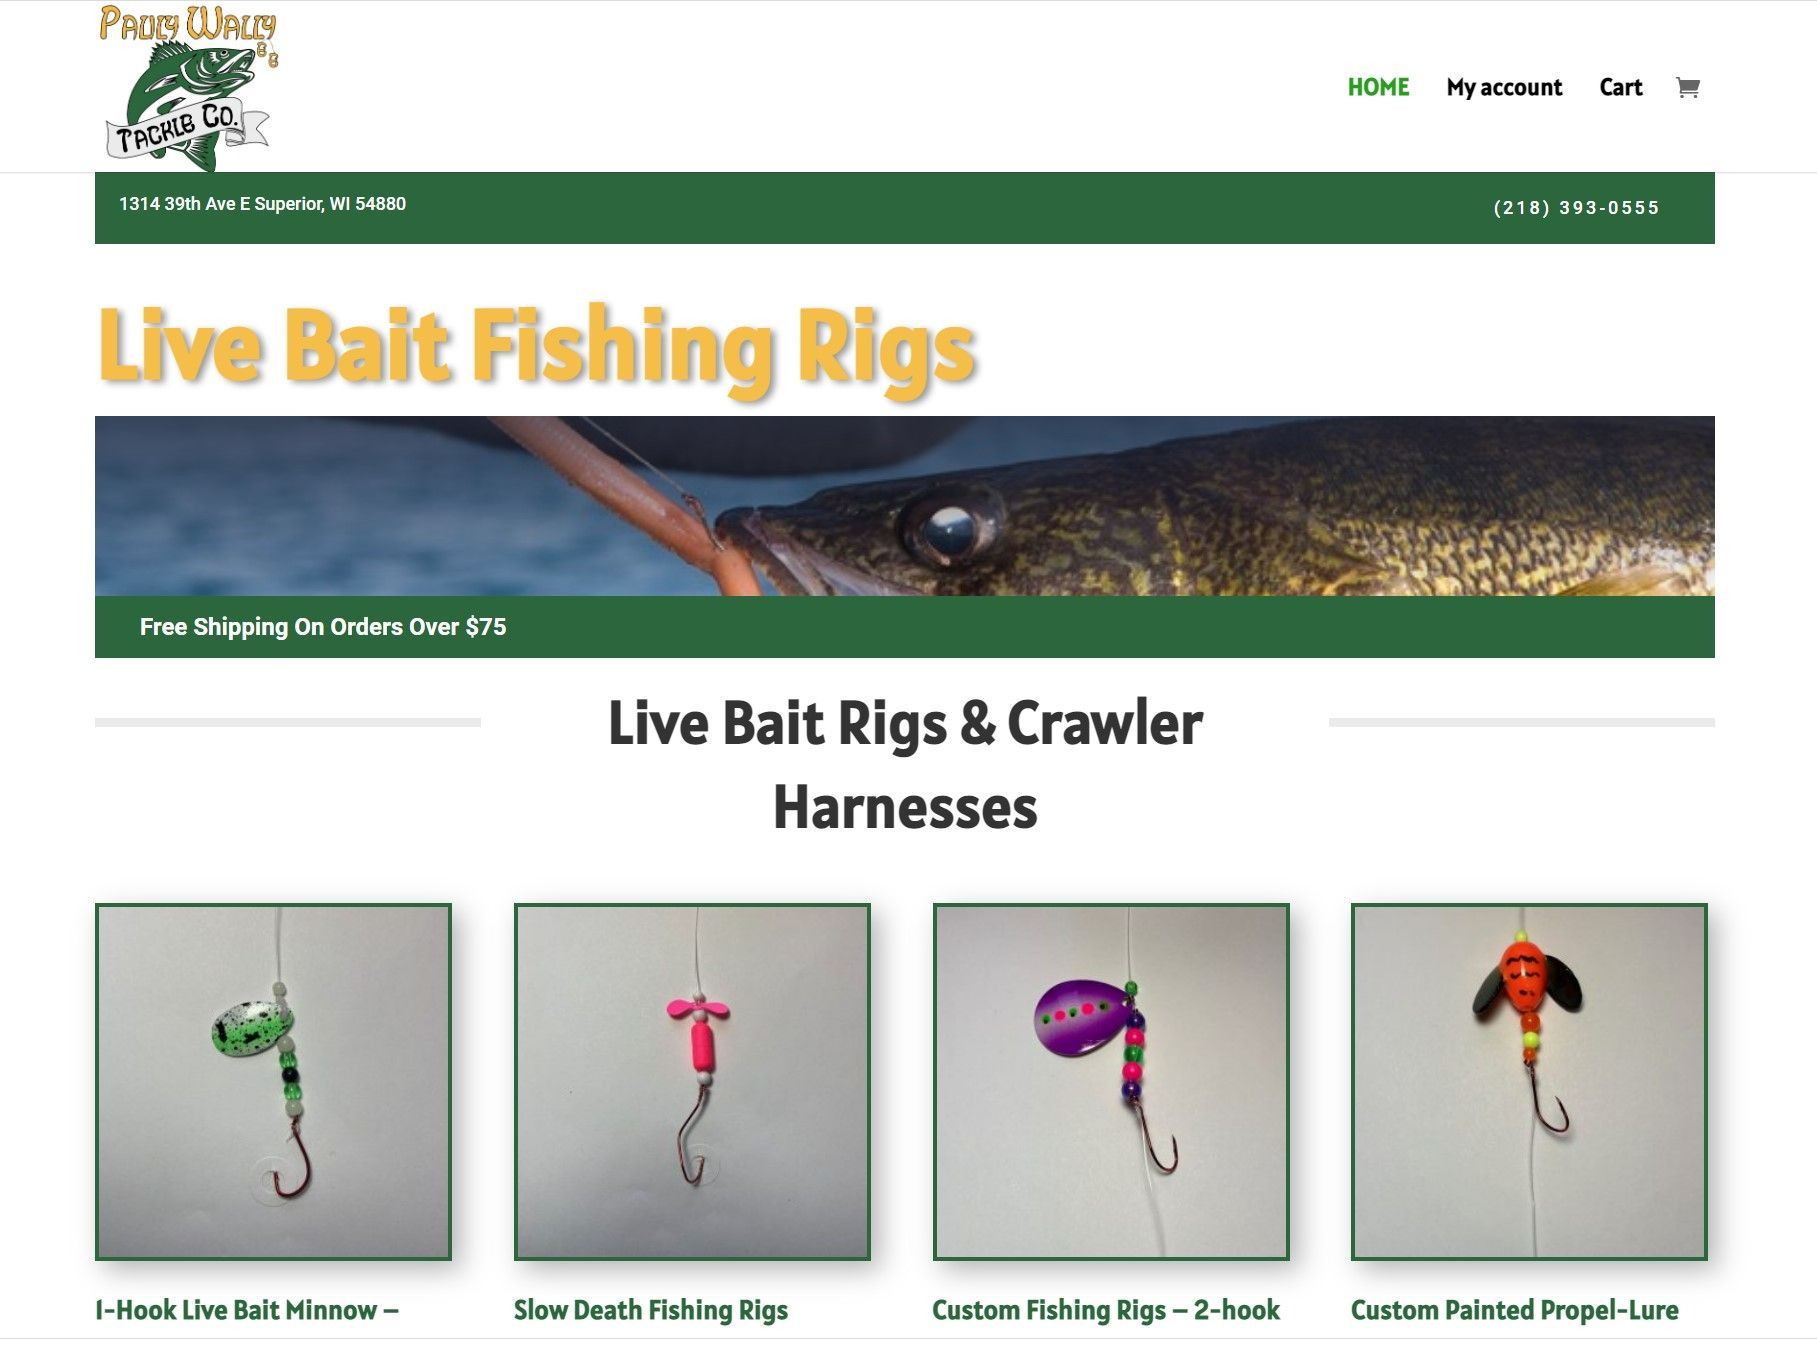 Check Out These Live Bait Fishing Rigs